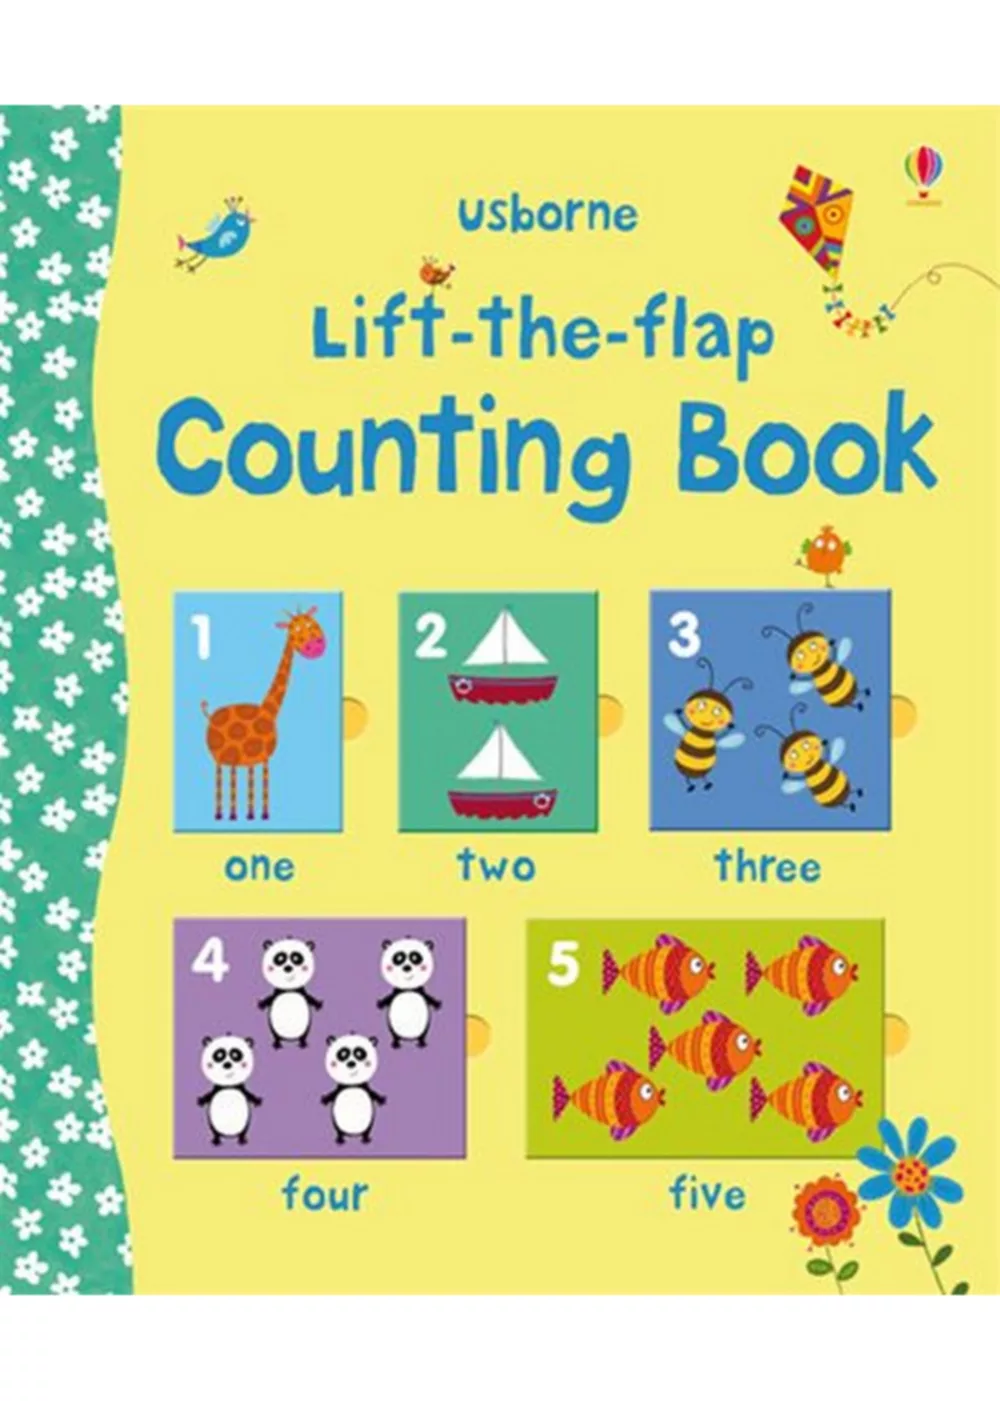 Lift-the-flap Counting book